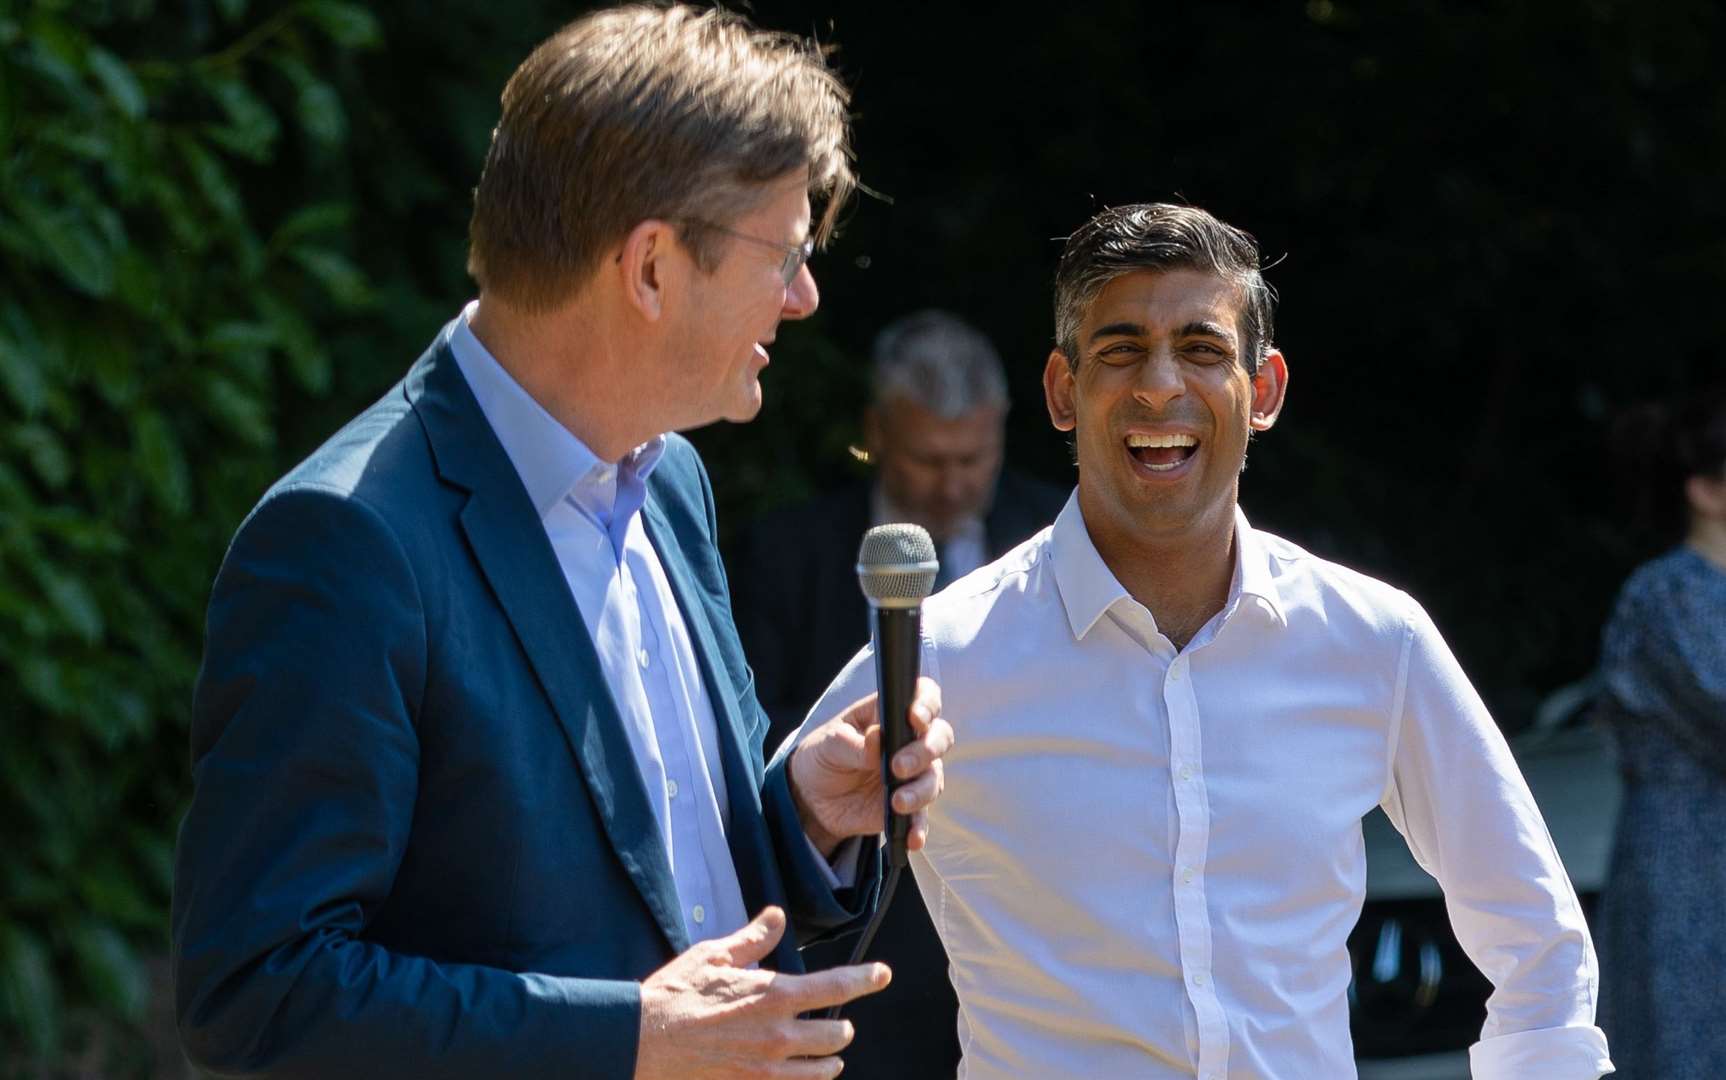 Rishi Sunak introduced to crowd at the Constitutional Club in Tunbridge Wells. Picture: Simon Walker